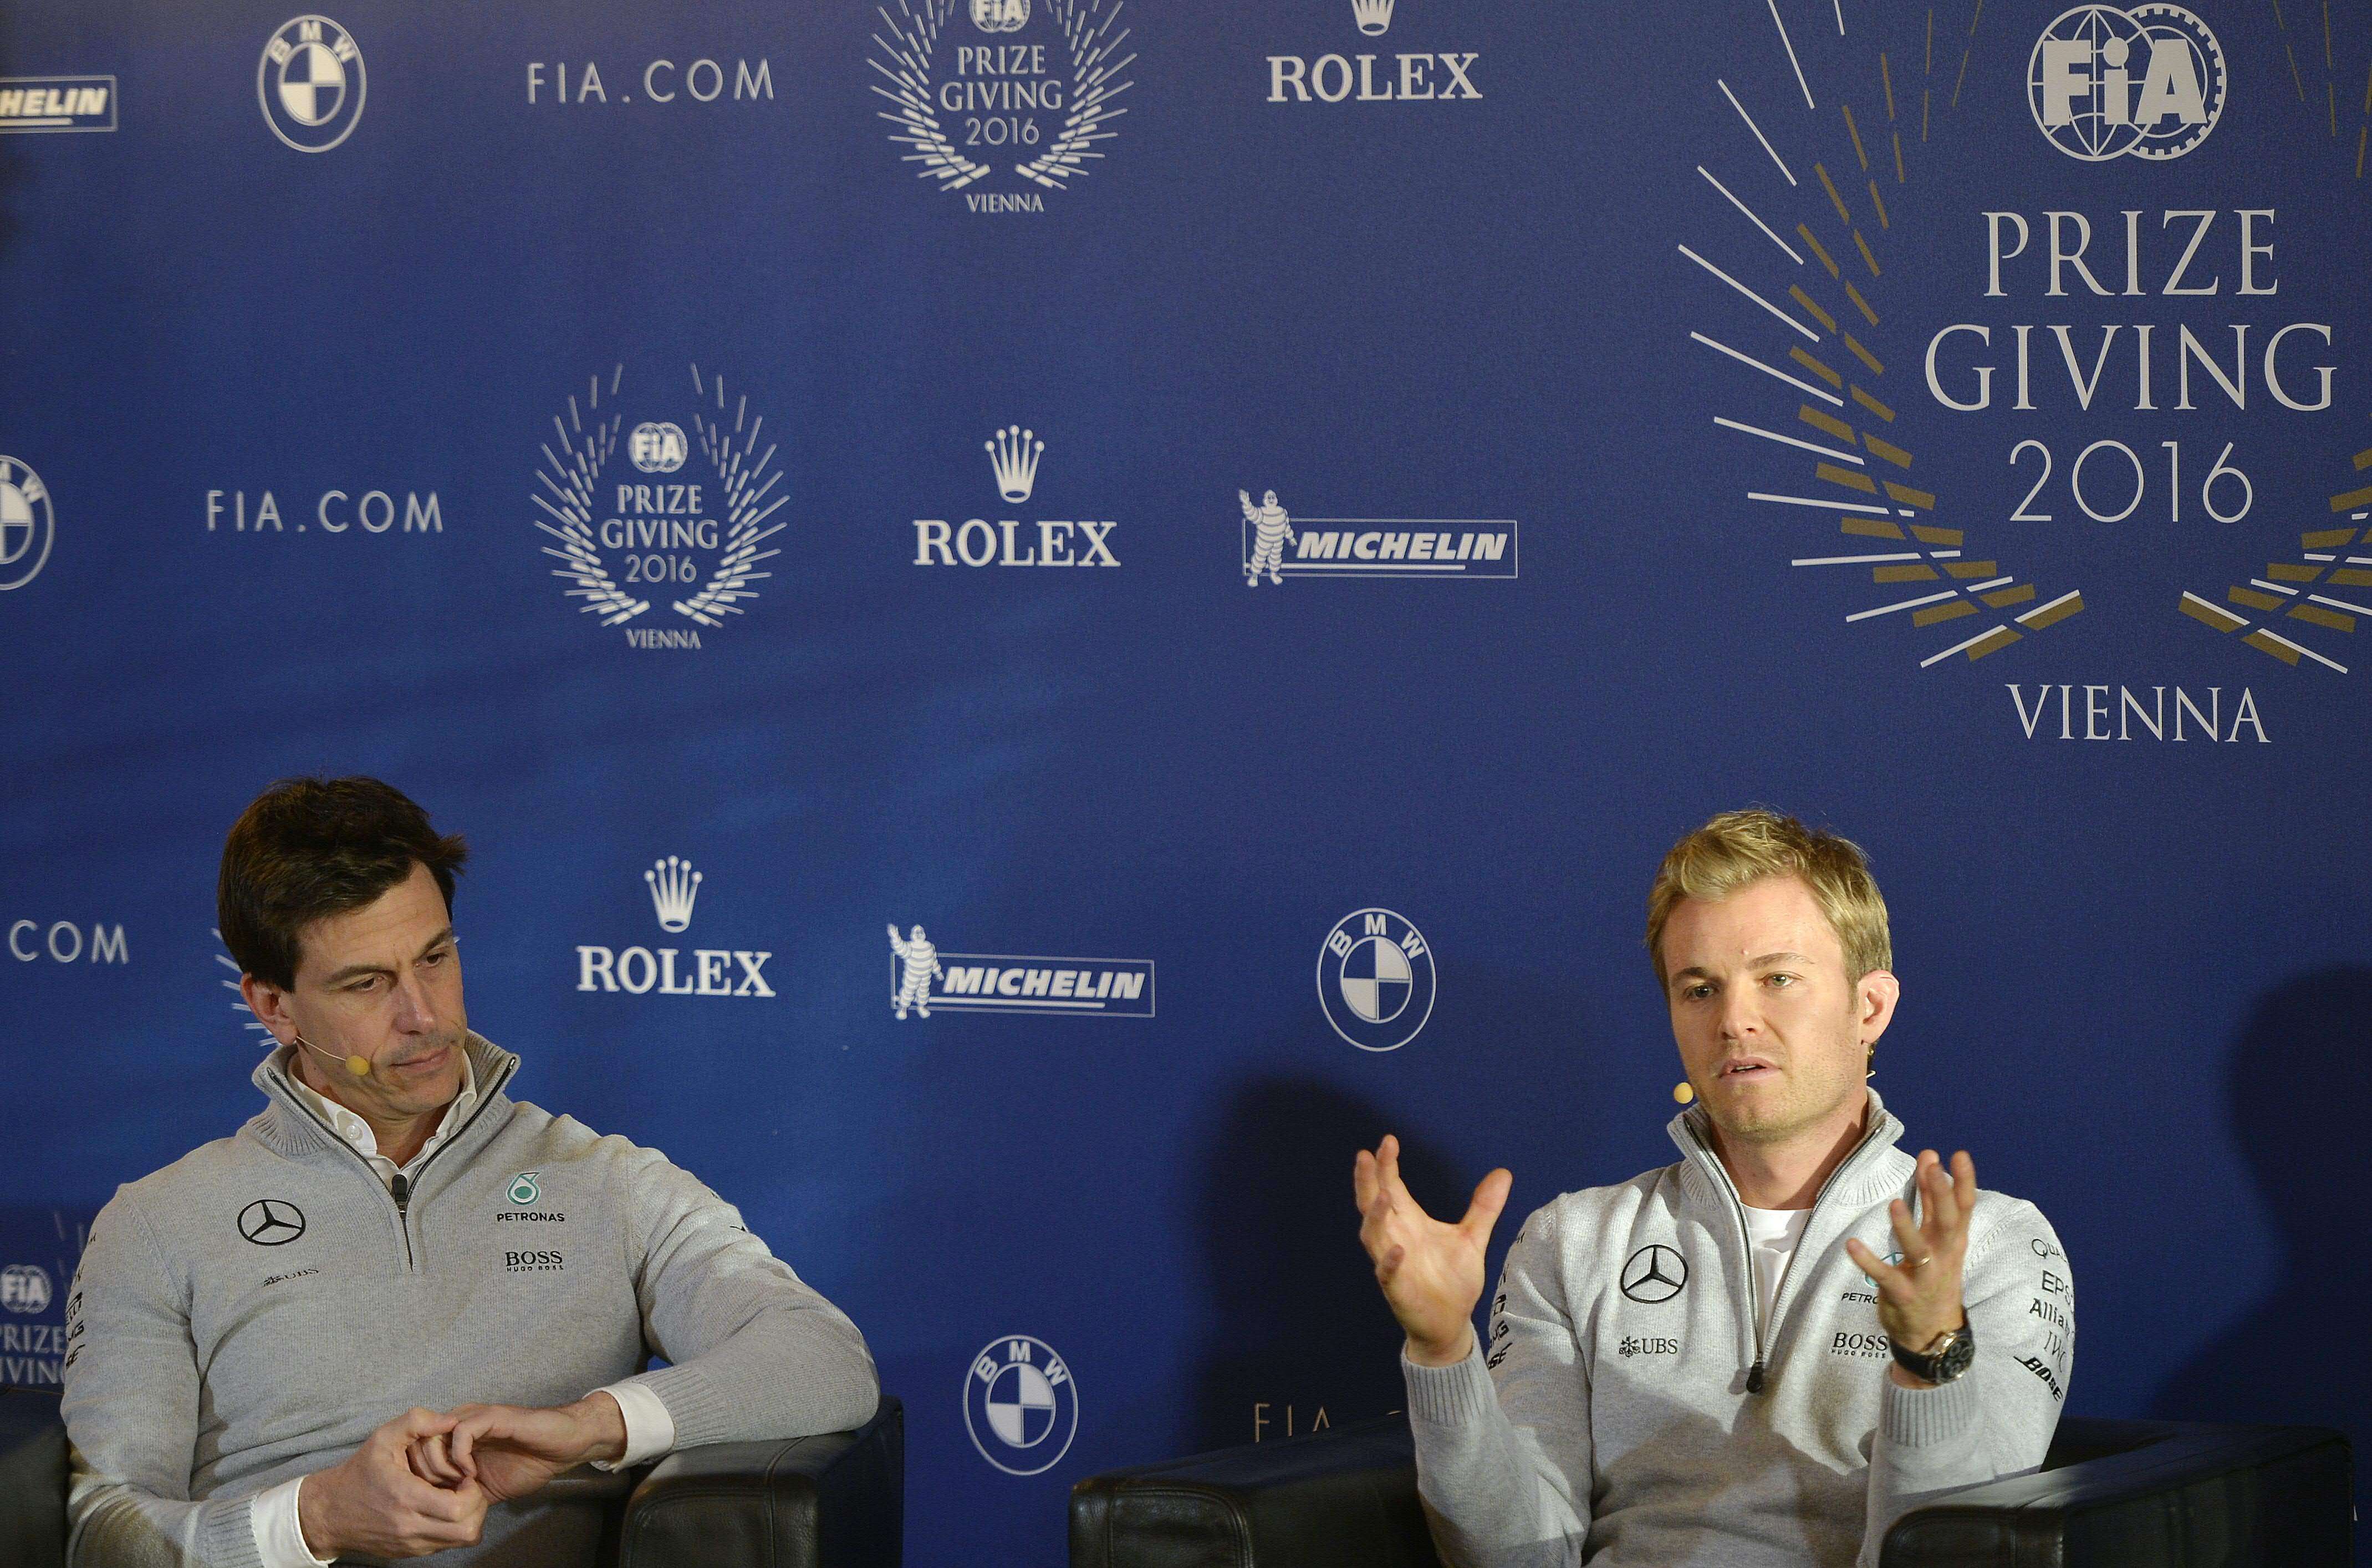 Formula One world champion Nico Rosberg sits next to his Mercedes boss Toto Wolff as he gives a press conference where he announced his retirement from the sport. Photo: AFP